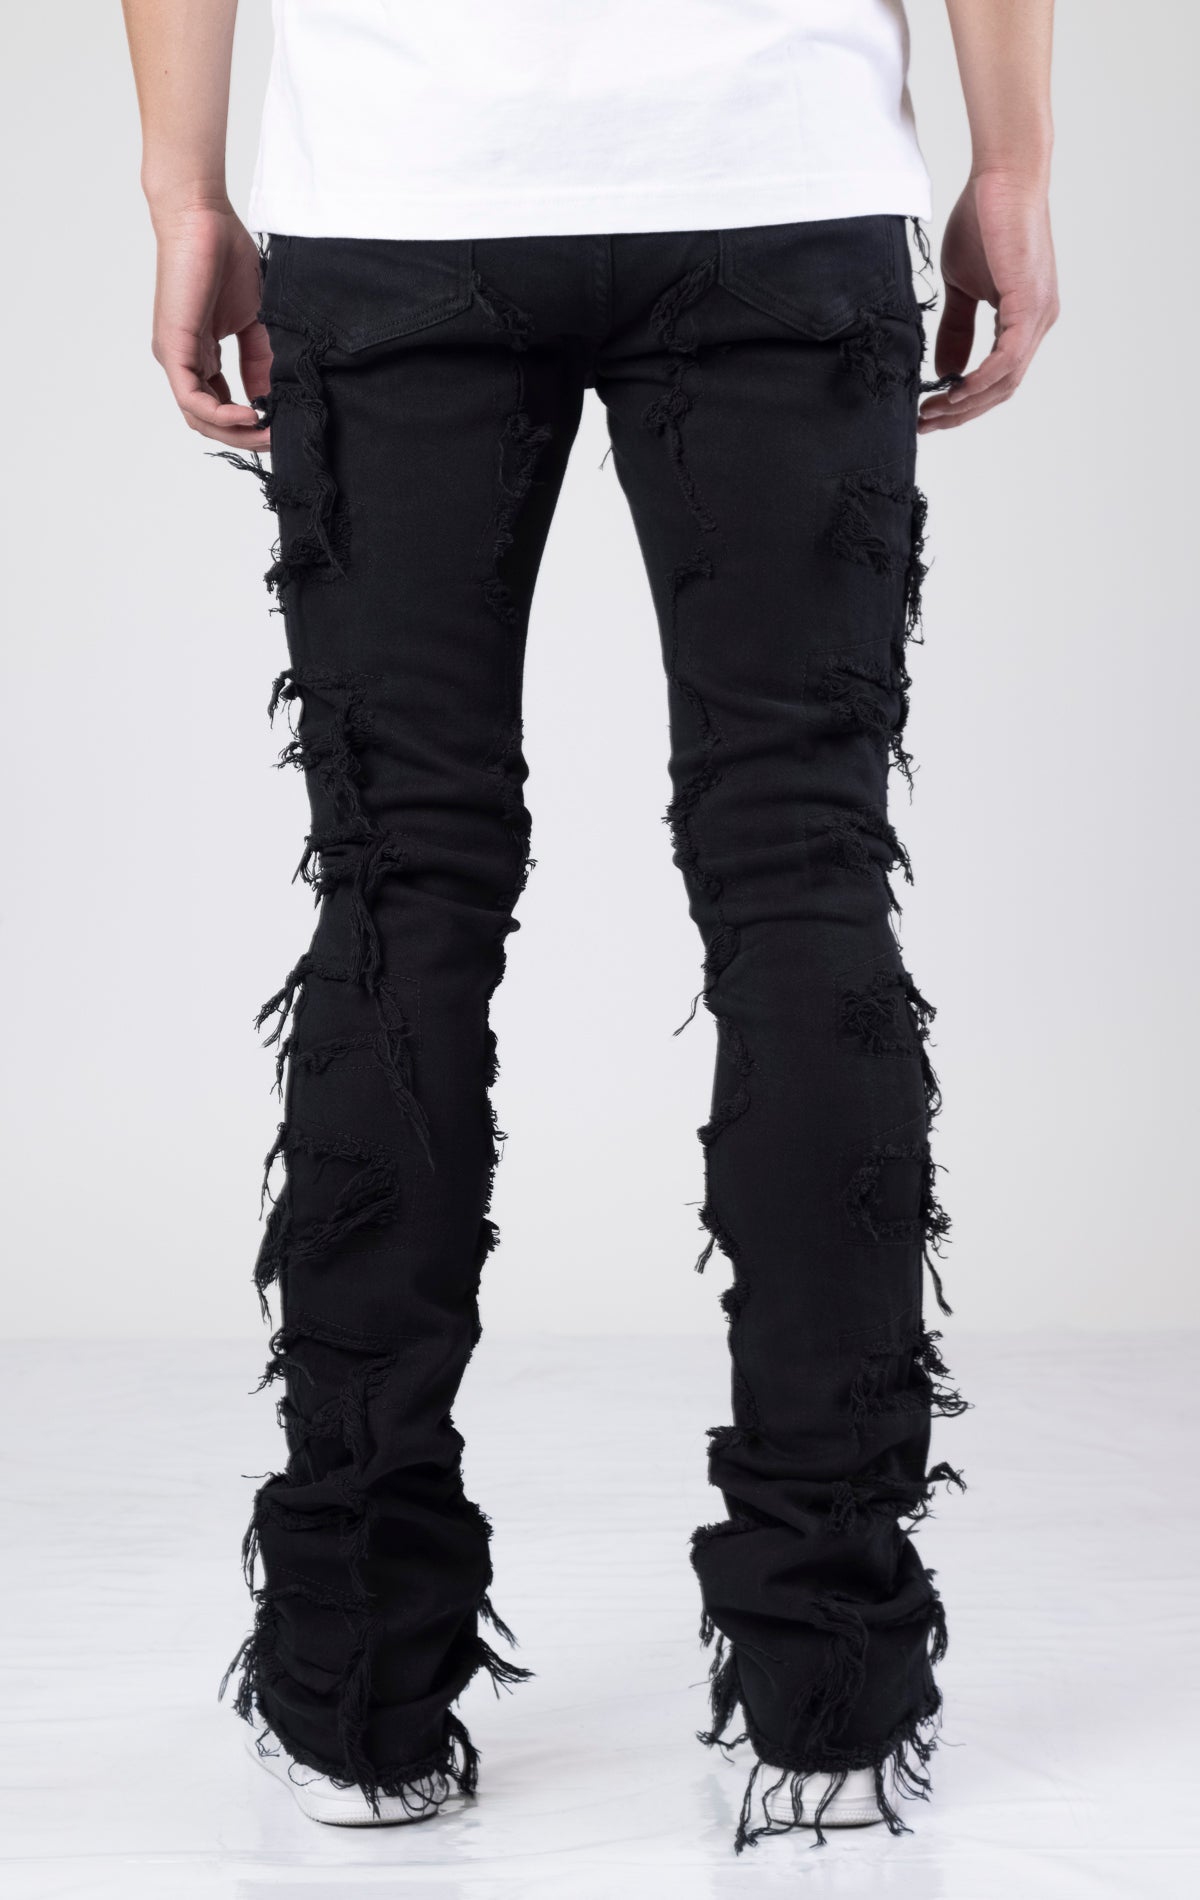 Black, tapered stacked jeans with frayed hems made of 98% cotton and 2% elastane.  Custom hardware and five pockets.